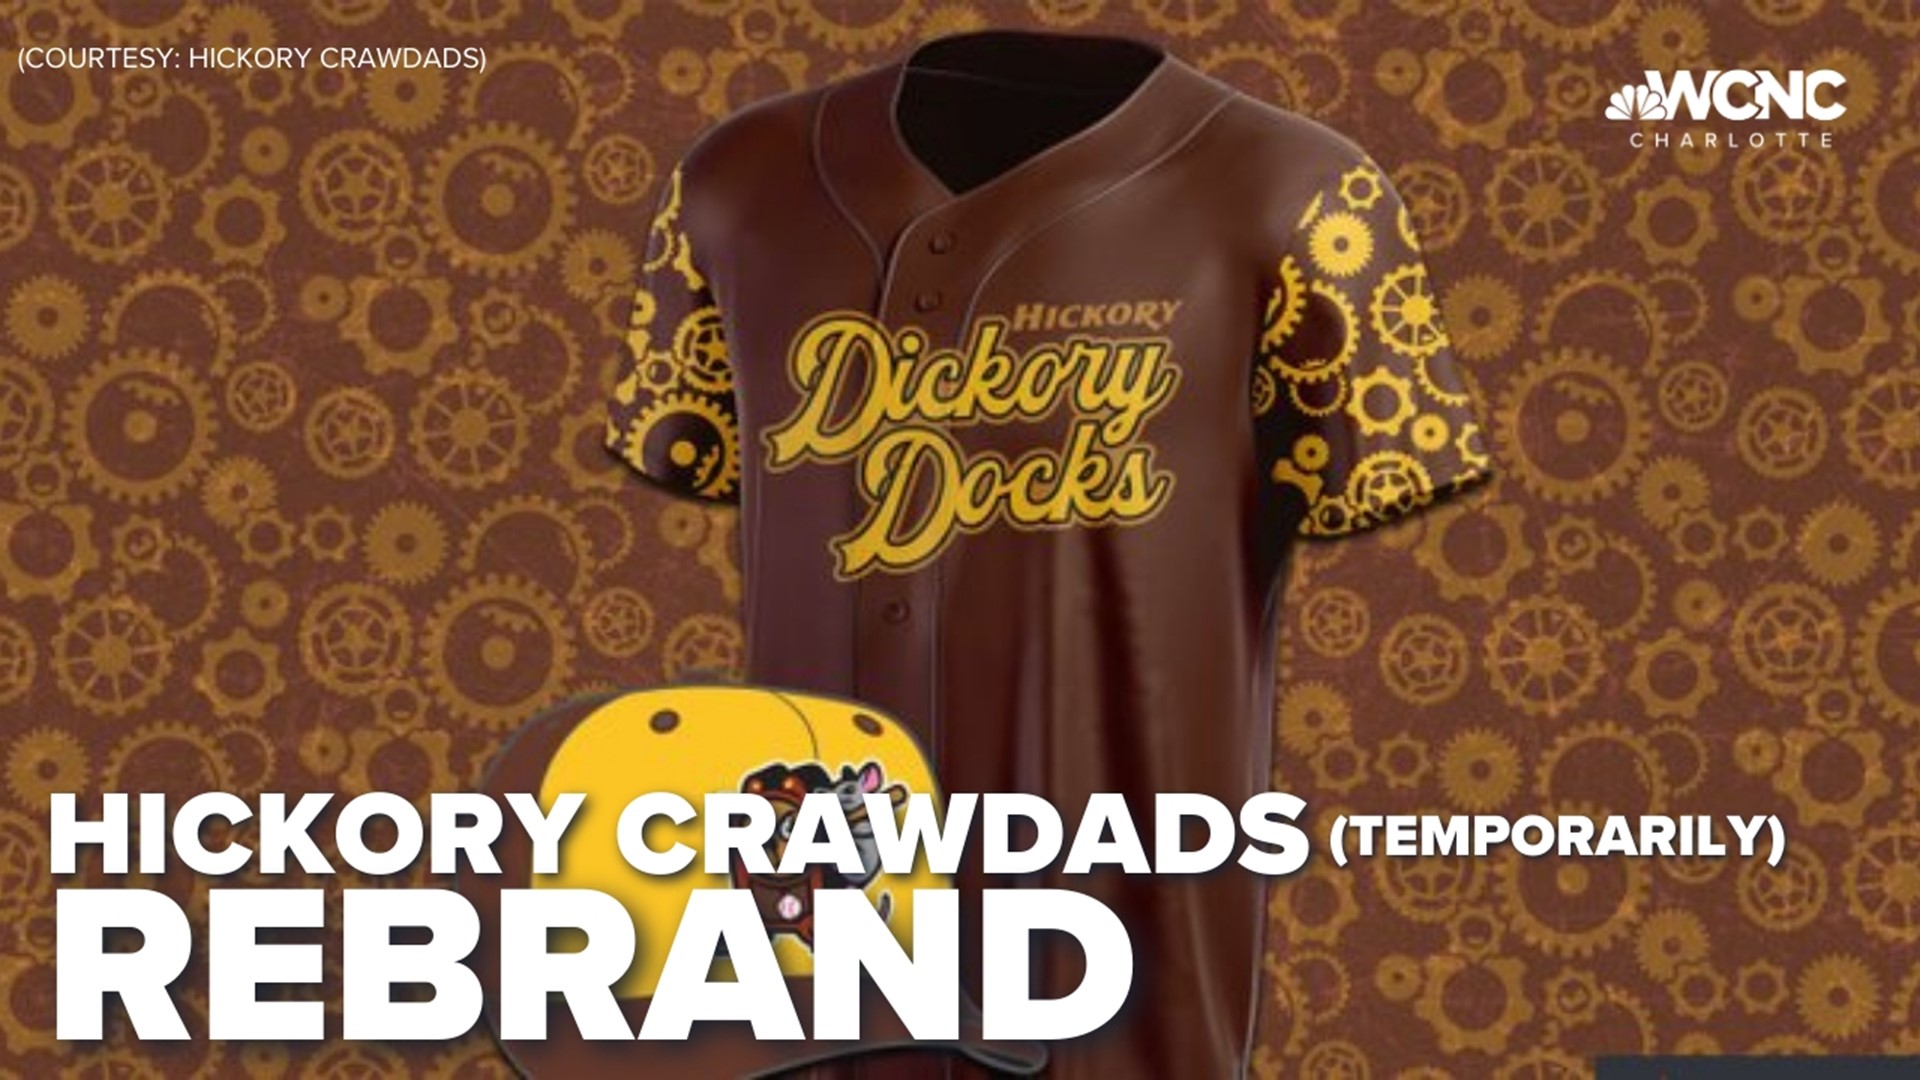 For three games, they will play as the Hickory Dickory Docks!